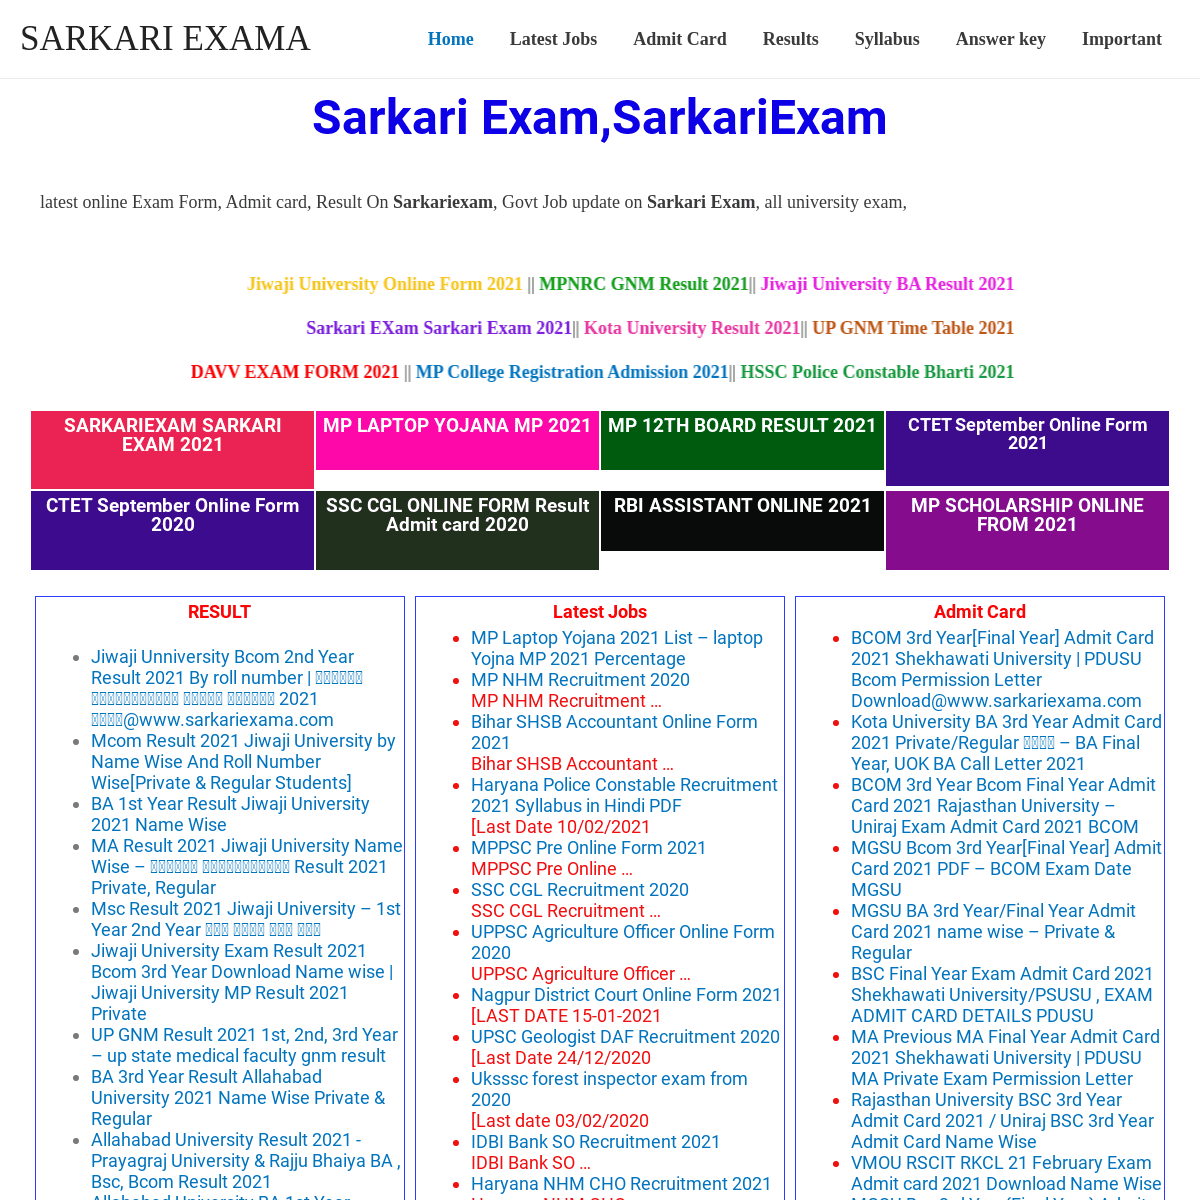 A complete backup of https://sarkariexama.com